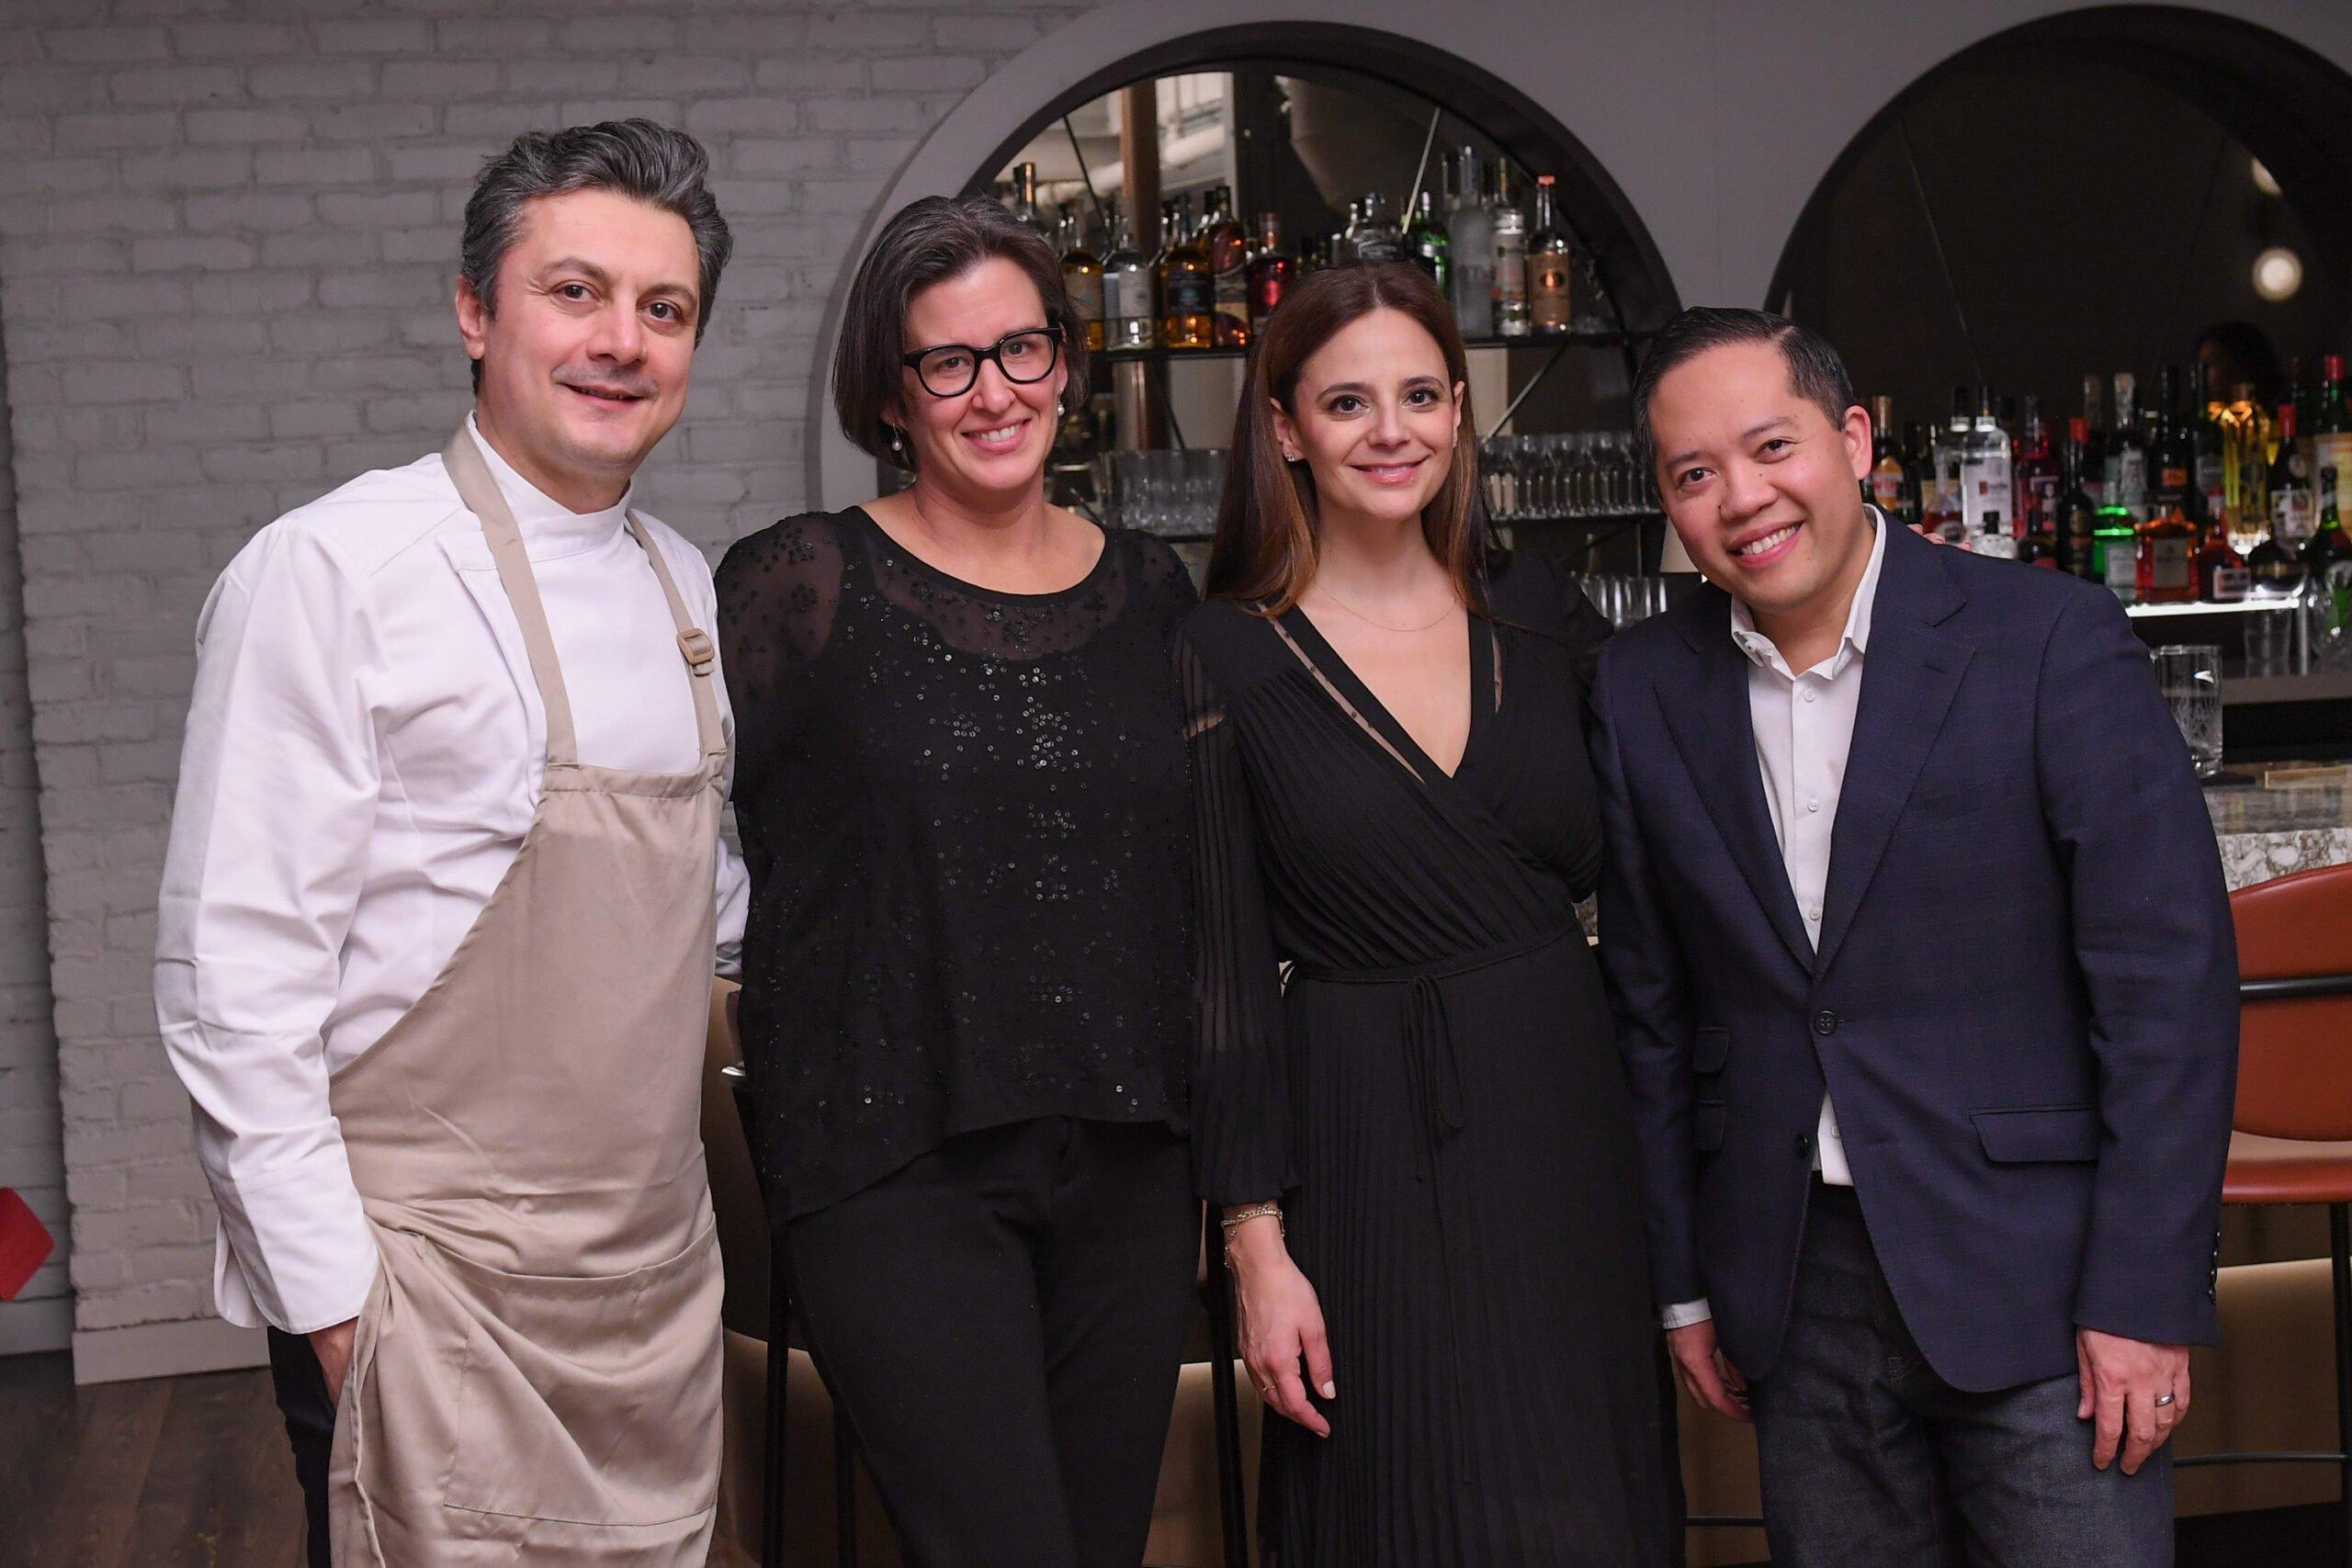 Roberto Marotta and Jacqueline Nicosia co-founders of Bar Ardo, with Sarah Fulford, editor-in-chief of Macleanâs; and Jason Maghanoy, publisher, Macleanâs.